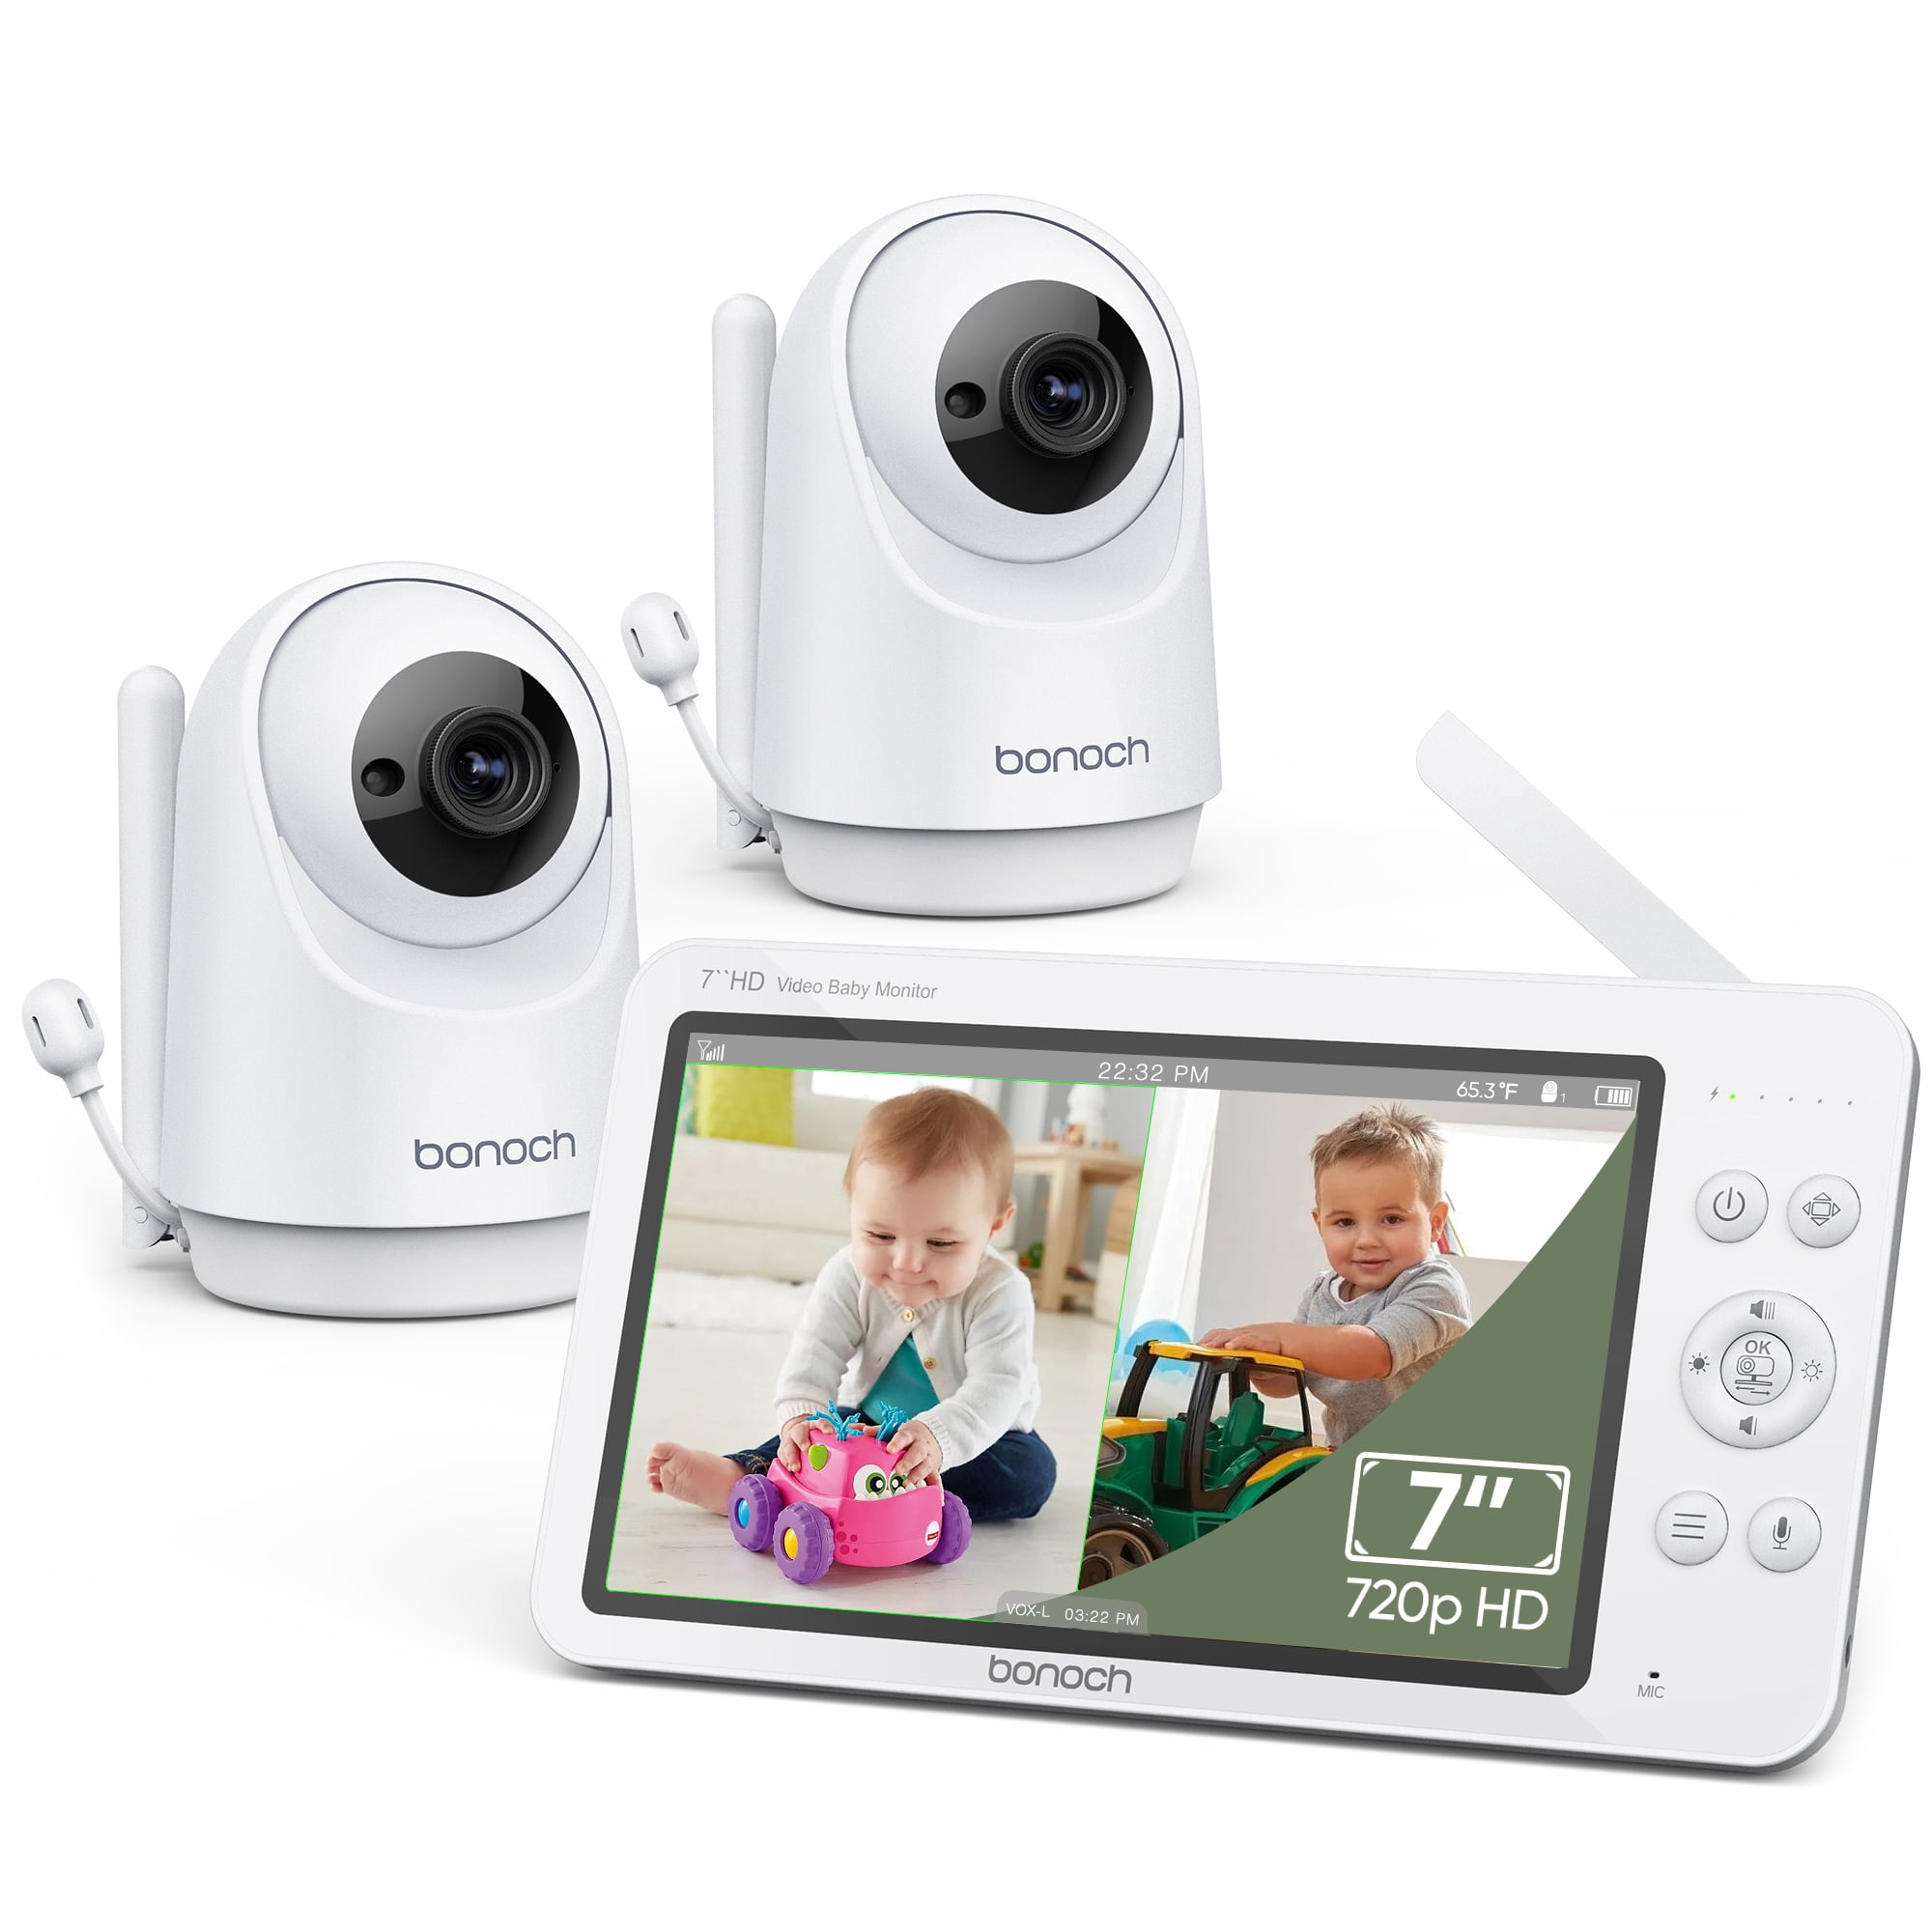 bonoch Baby Monitor with 2 Cameras 7″ 720P HD LCD Split Screen Video Audio, Auto Night Vision